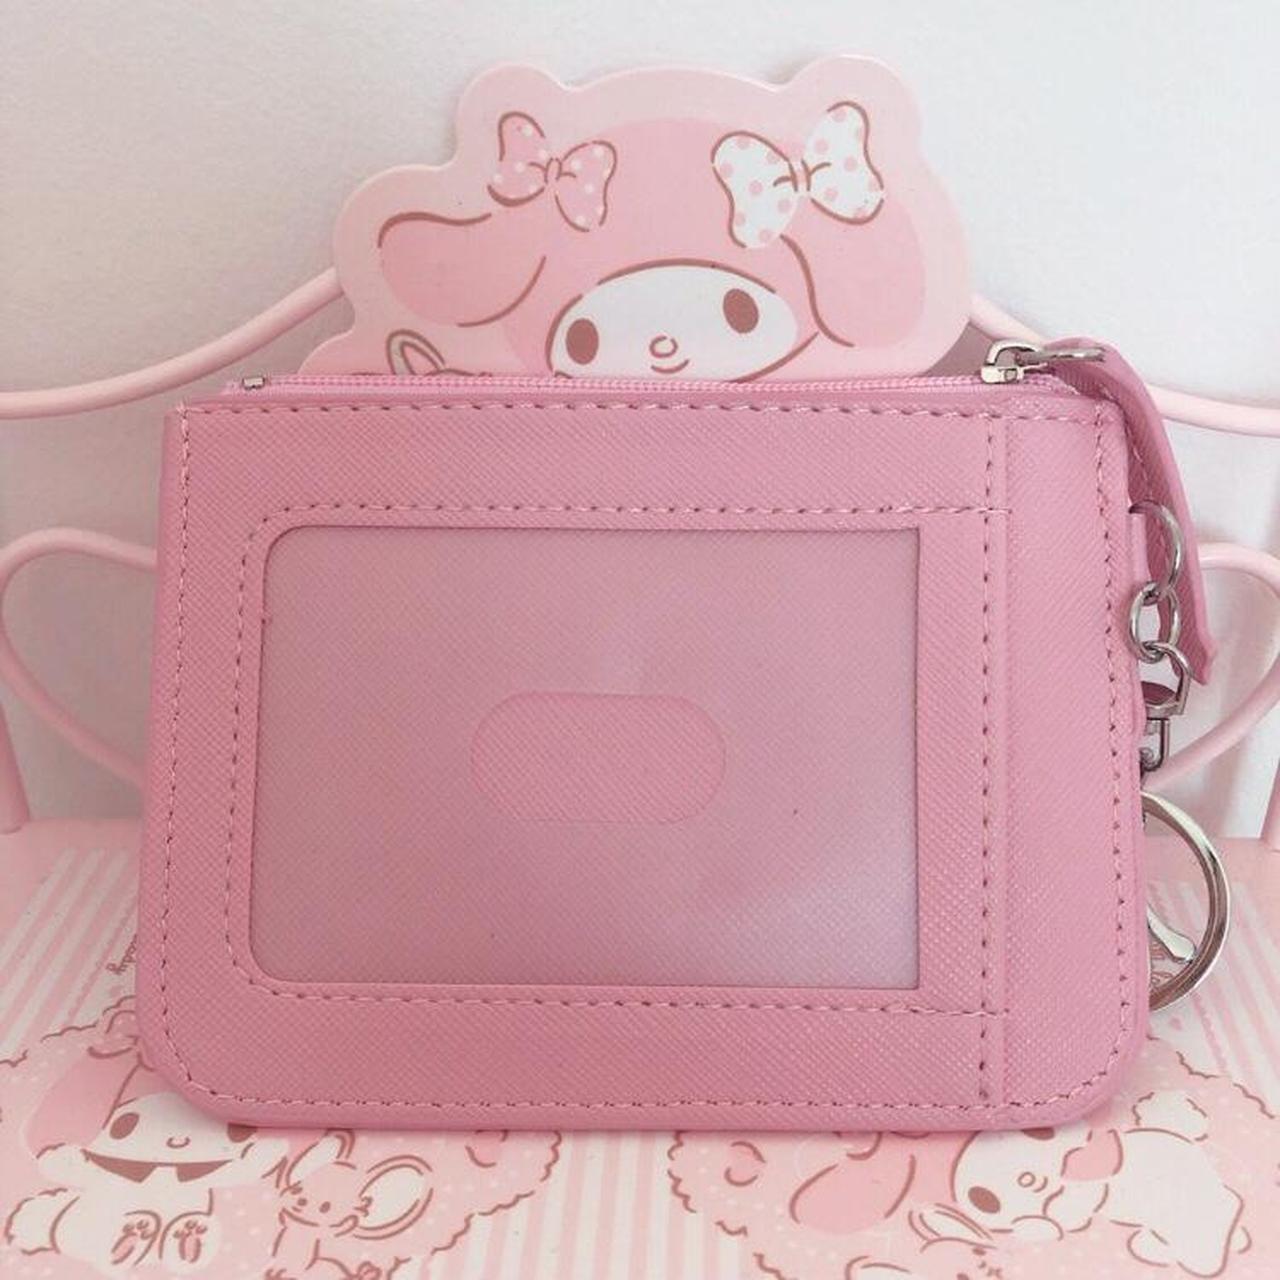 Buy kofoviv Cute Fashionable Cartoon character My melody Small Wallet Short  Ladies Girls Purses Leather Trifold Wallets Money Bag(I) at Amazon.in